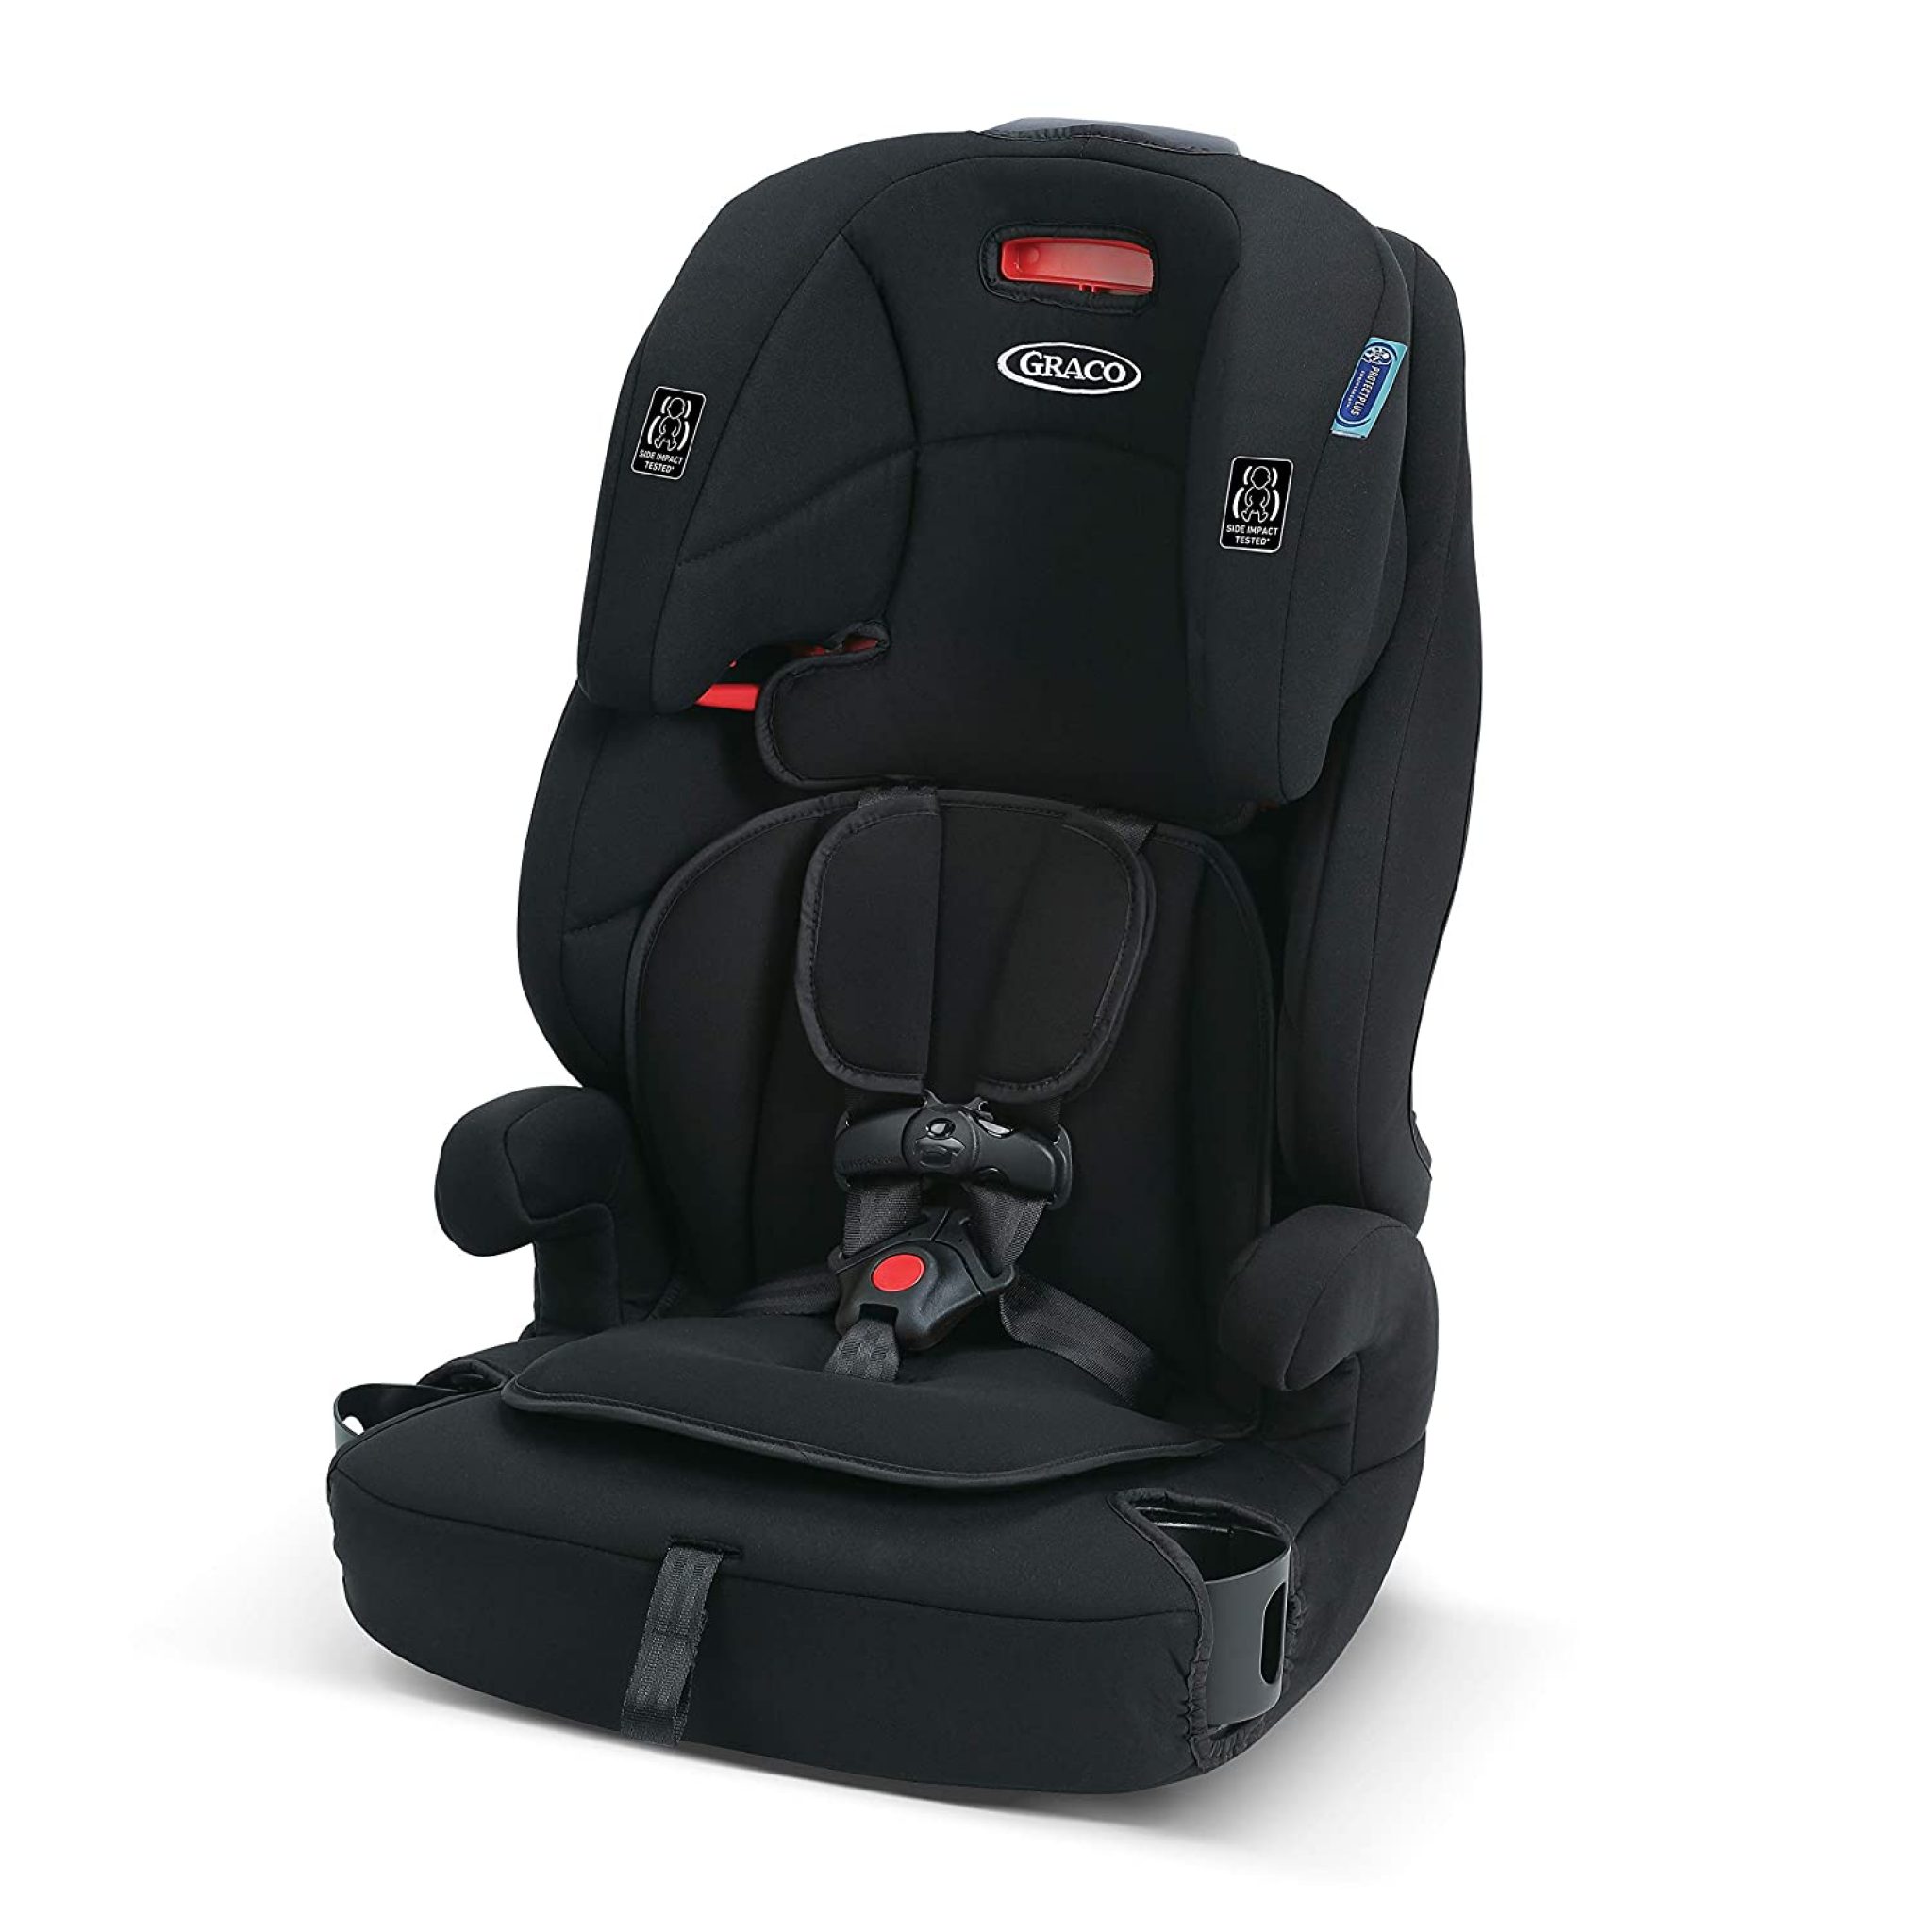 Best 5 Point Harness Booster Seat For Over 40 lbs Reviews & Buying Guide